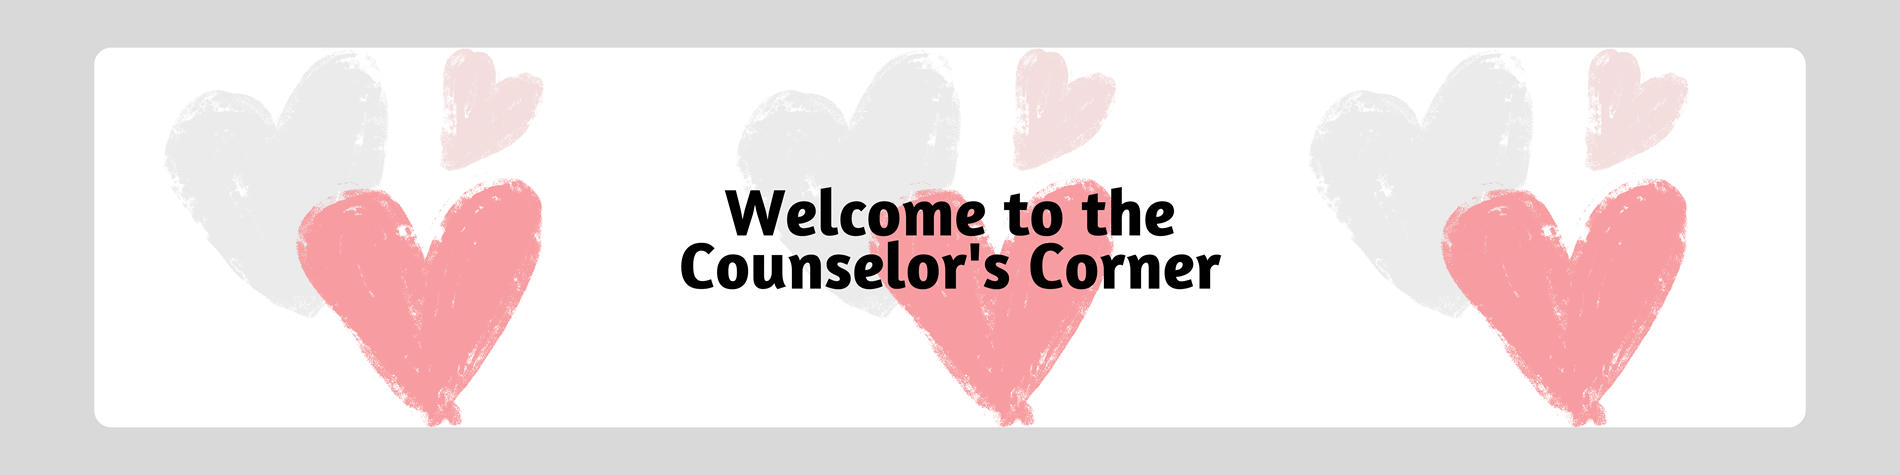 Welcome to the Counselor's Corner